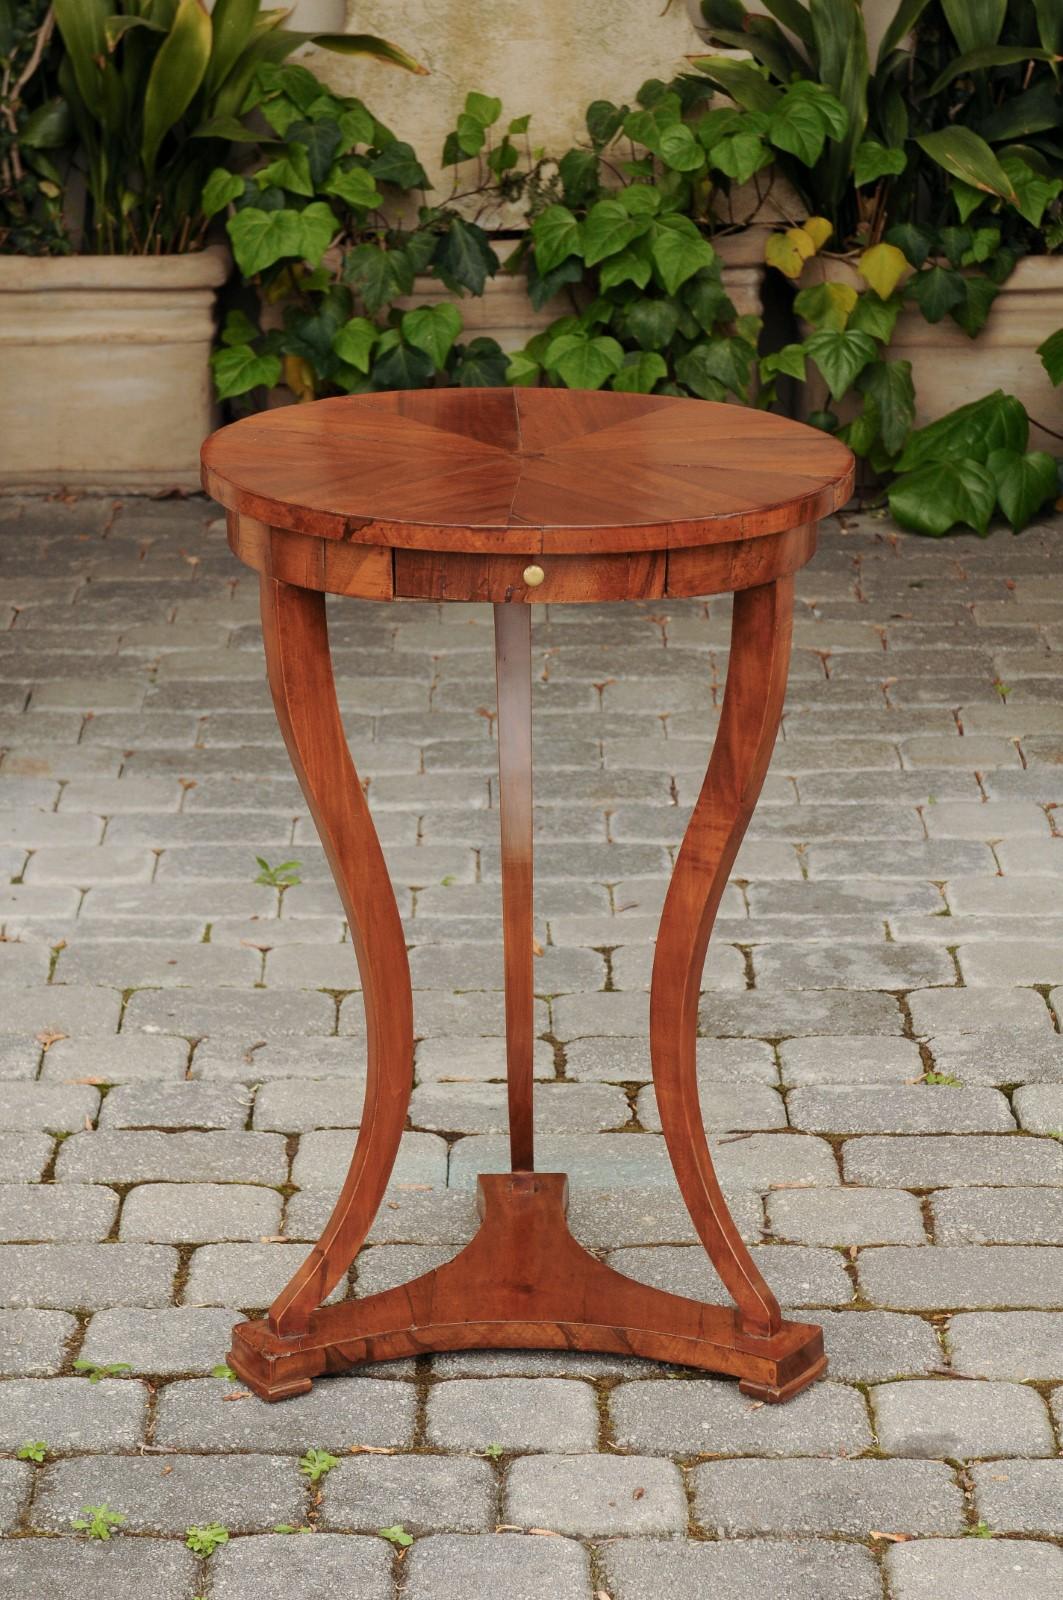 An Austrian Biedermeier period guéridon side table from the mid-19th century, with radiating veneered top, single drawer, cabriole legs and lower shelf. Born in Imperial Austria during the first half of the 19th century, this guéridon features an